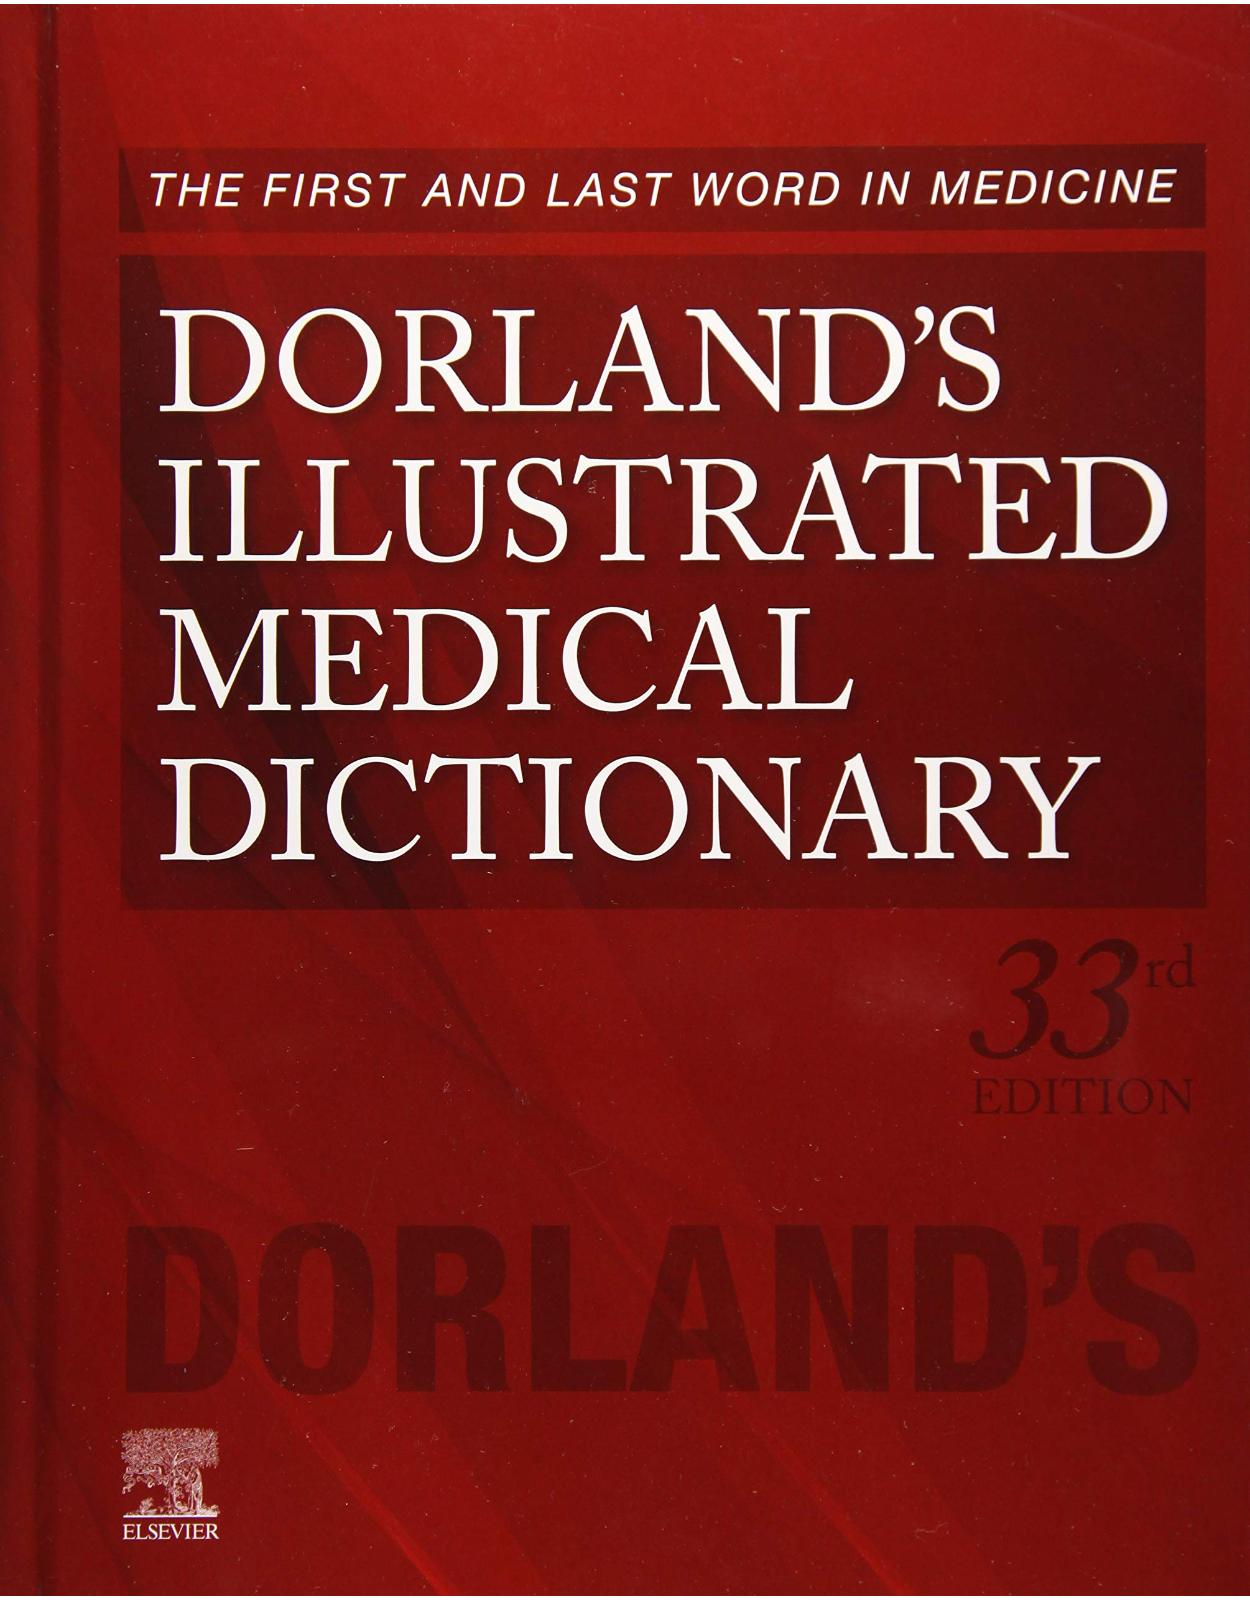 Dorland’s Illustrated Medical Dictionary (Dorland’s Medical Dictionary) 